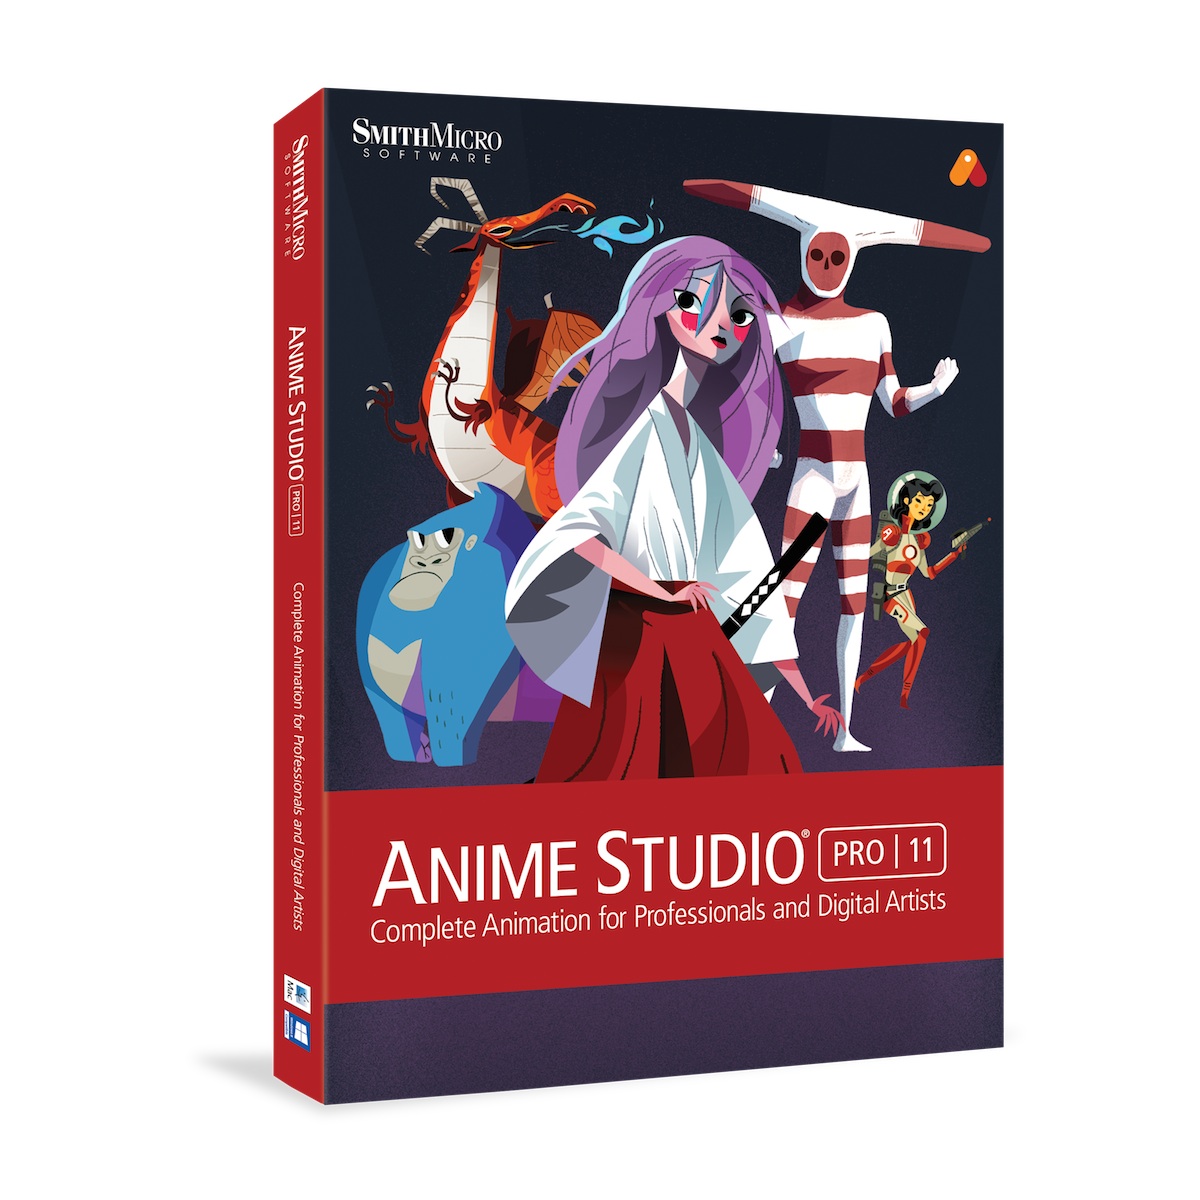 SmithMicro Software launches Anime Studio 11 series apps